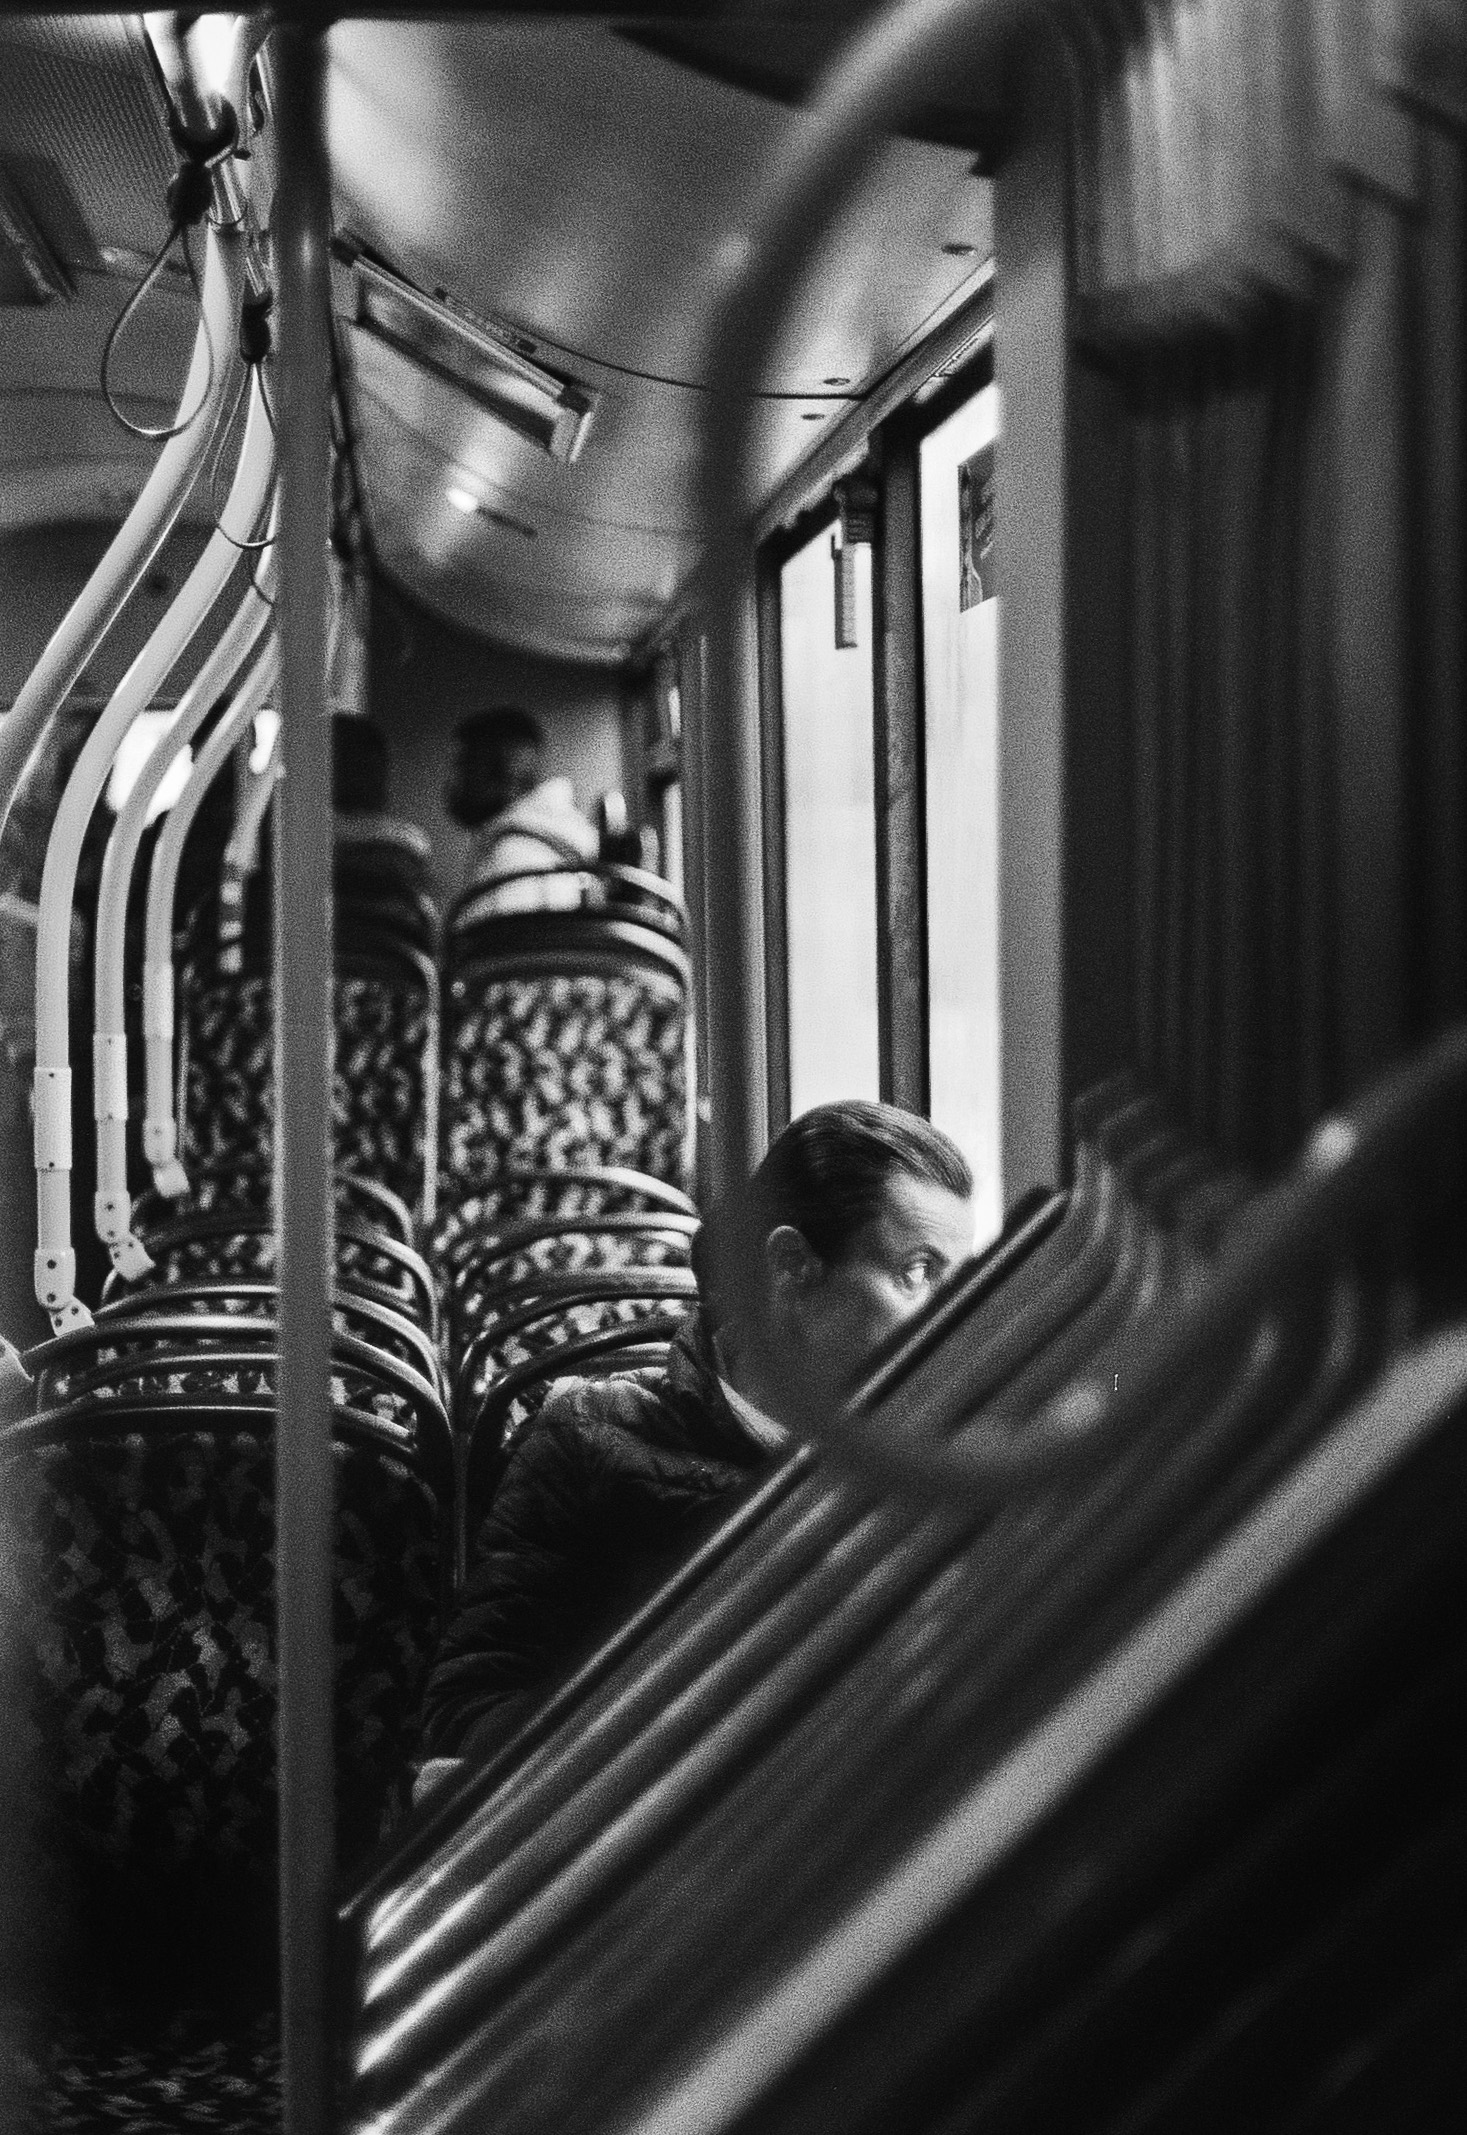 A Woman On The Bus